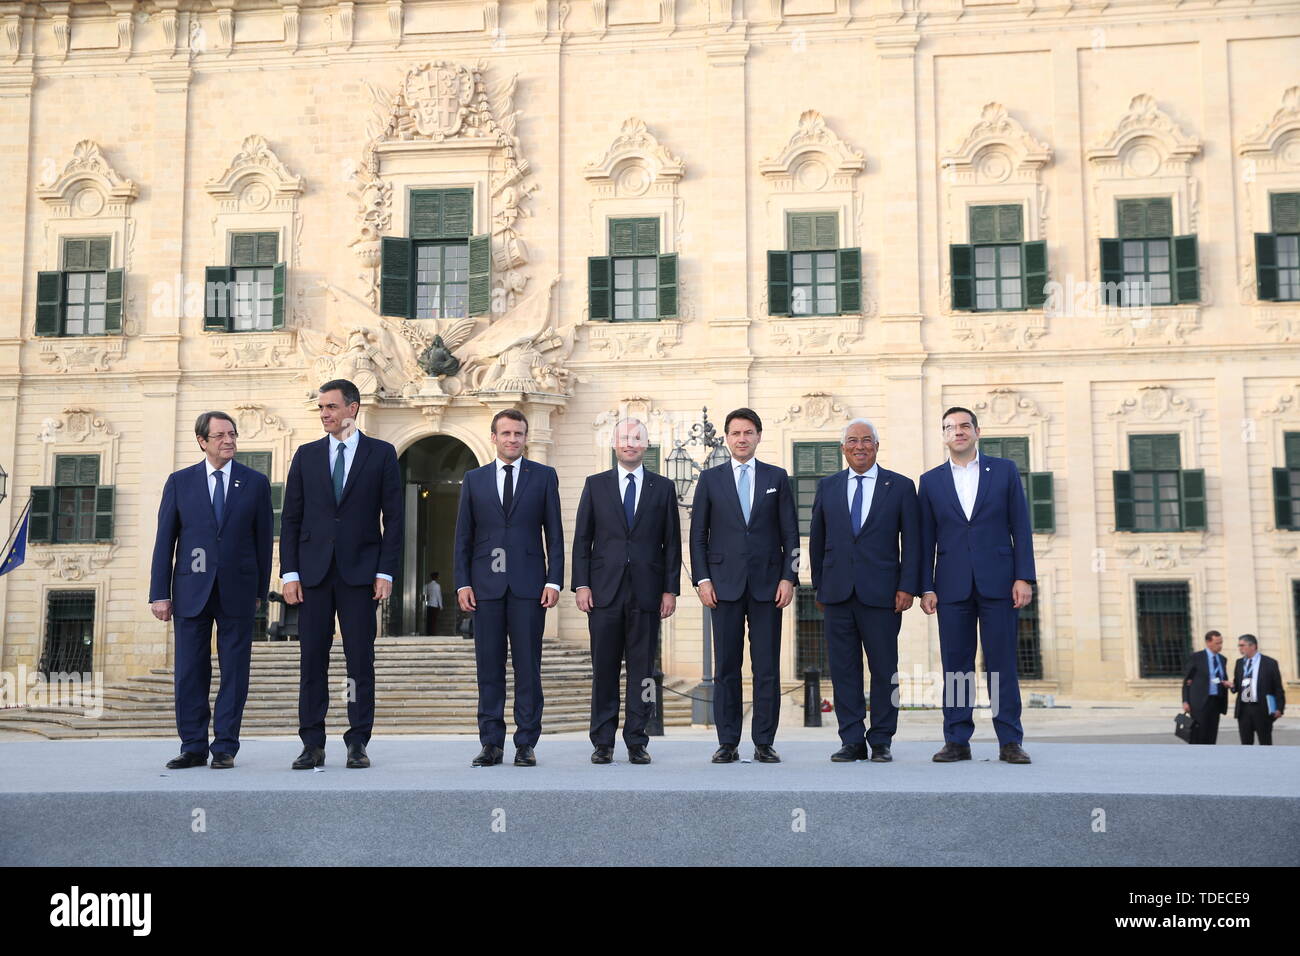 (190615) -- VALLETTA, June 15, 2019 (Xinhua) -- Greek Prime Minister Alexis Tsipras, Portuguese Prime Minister Antonio Costa, Italian Prime Minister Giuseppe Conte, Maltese Prime Minister Joseph Muscat, French President Emmanuel Macron, Spanish Prime Minister Pedro Sanchez and Cypriot President Nicos Anastasiades(from R to L) attend a summit of the Southern EU Member States in Valletta, capital of Malta, on June 14, 2019. Seven leaders of Southern EU Member States met in Malta on Friday where they discussed issues of common concern ranging from migration to climate change and the EU budget. ( Stock Photo